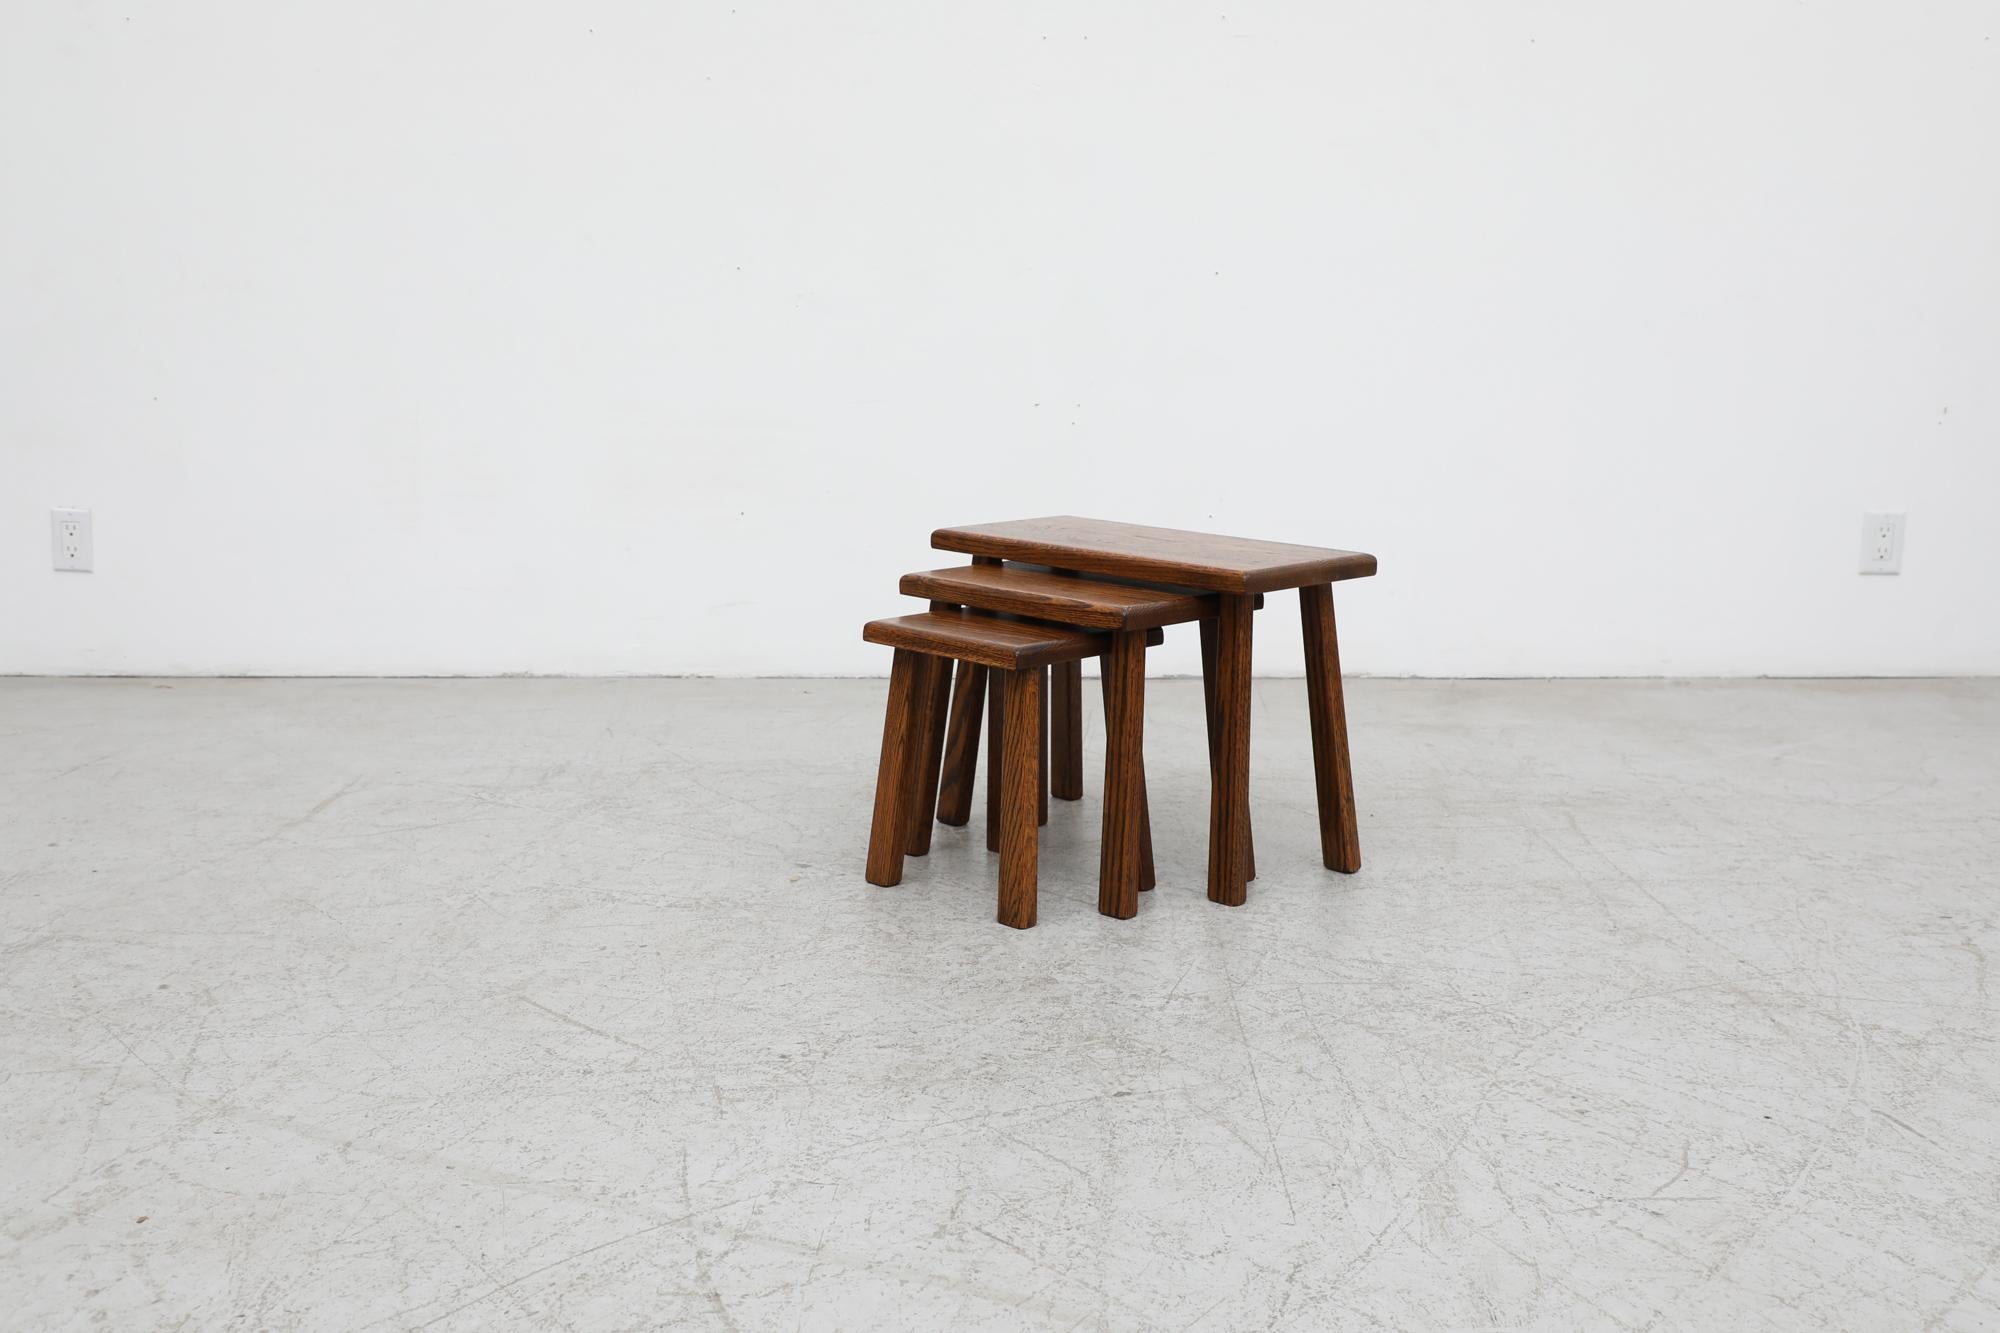 Pierre Chapo Inspired Brutalist Dark Oak Nesting Tables with Tiger Grain In Good Condition For Sale In Los Angeles, CA